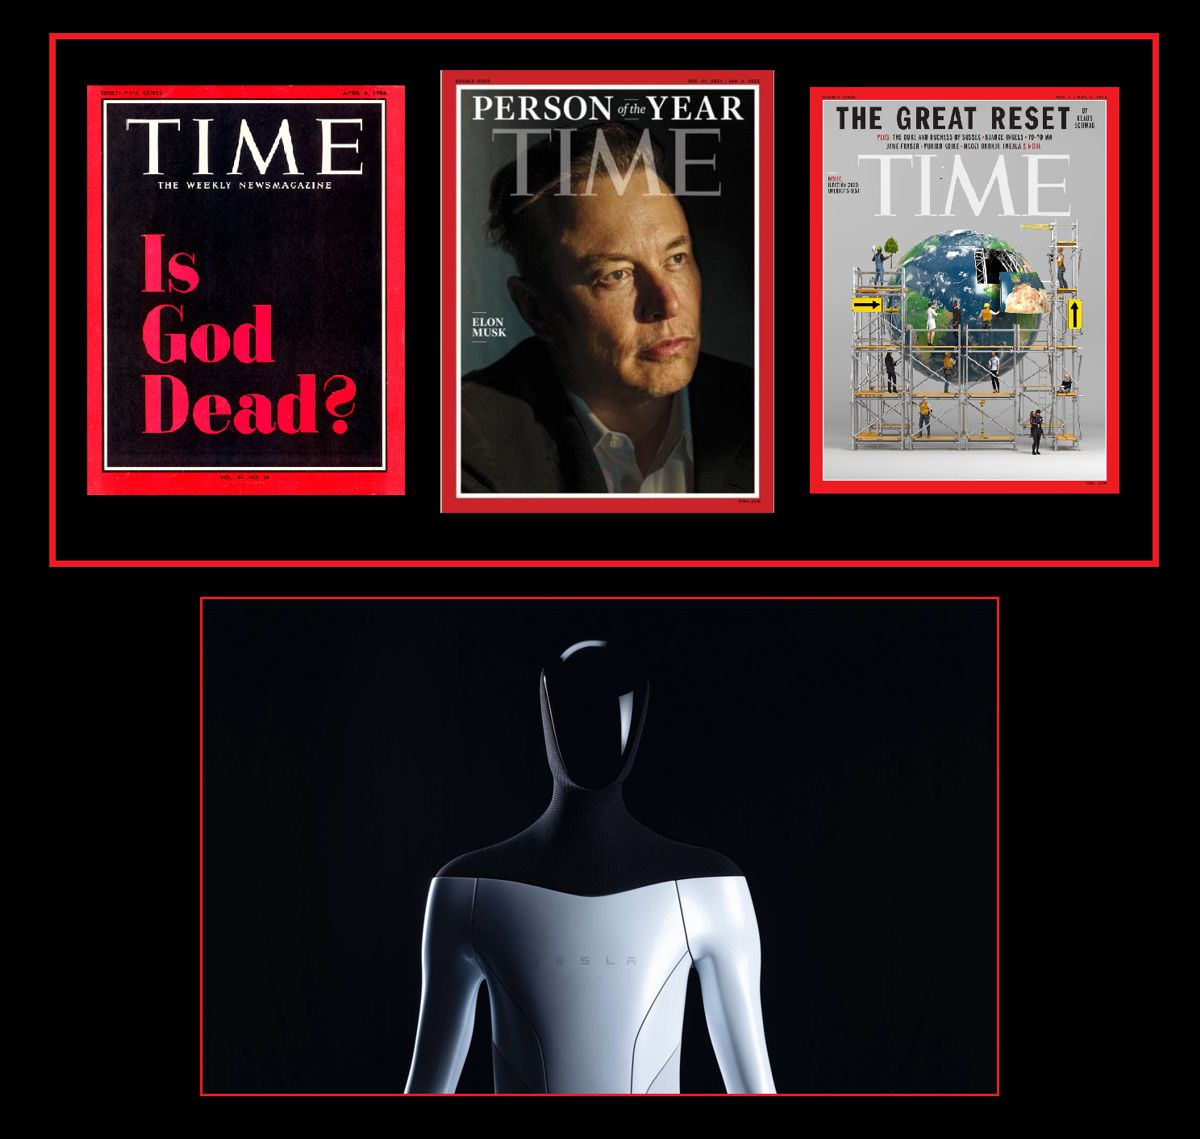 Is God Dead? Elon Musk Person of the Year. The Great Reset!